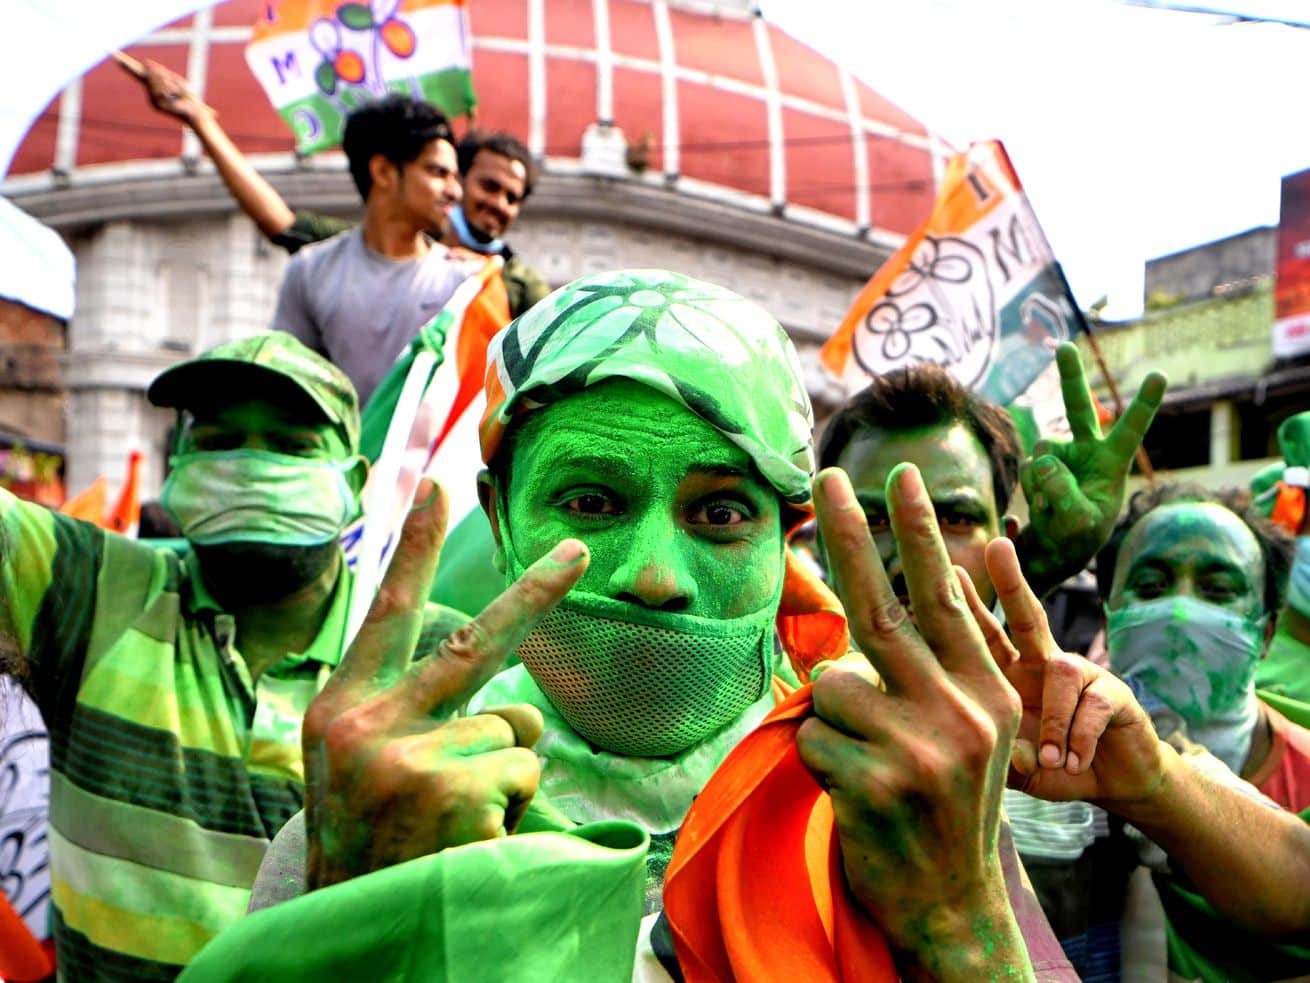 India’s ruling party just lost a key election. It’s worrying that they even stood a chance.